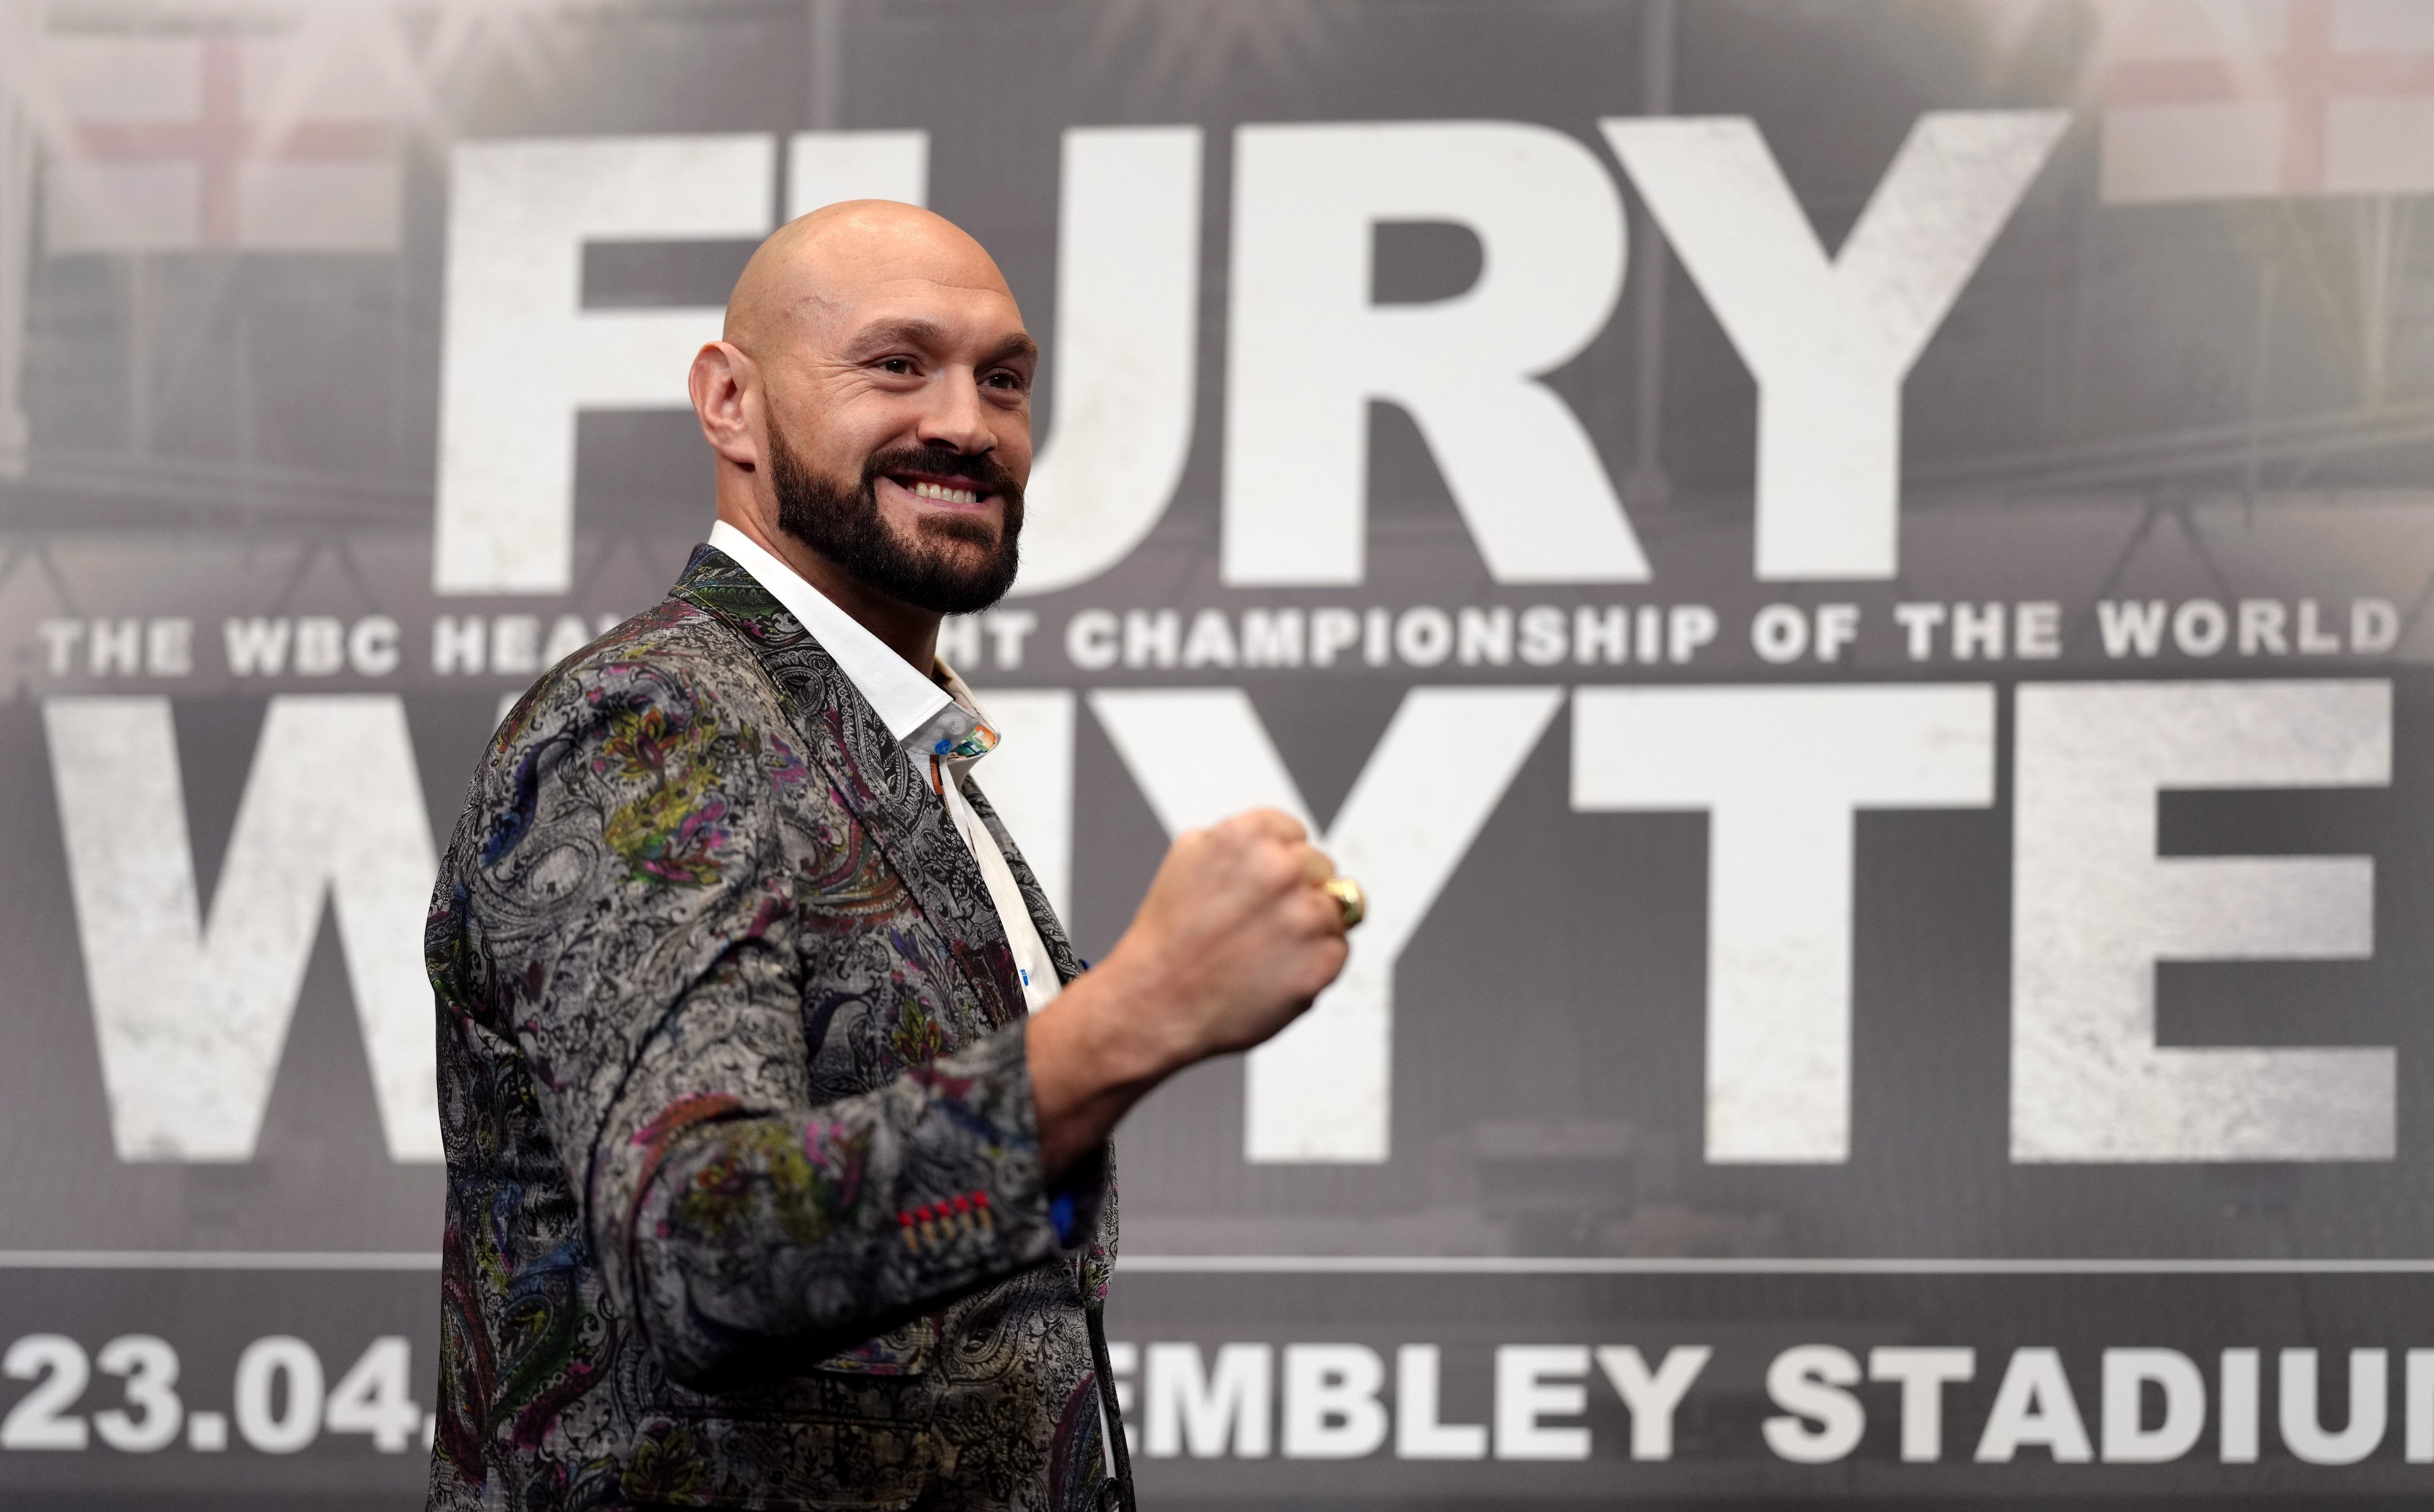 British boxer Tyson Fury attends a press conference at Wembley Stadium for his fight against Dillian Whyte – who no-showed the event. Photo: John Walton/PA Wire/dpa